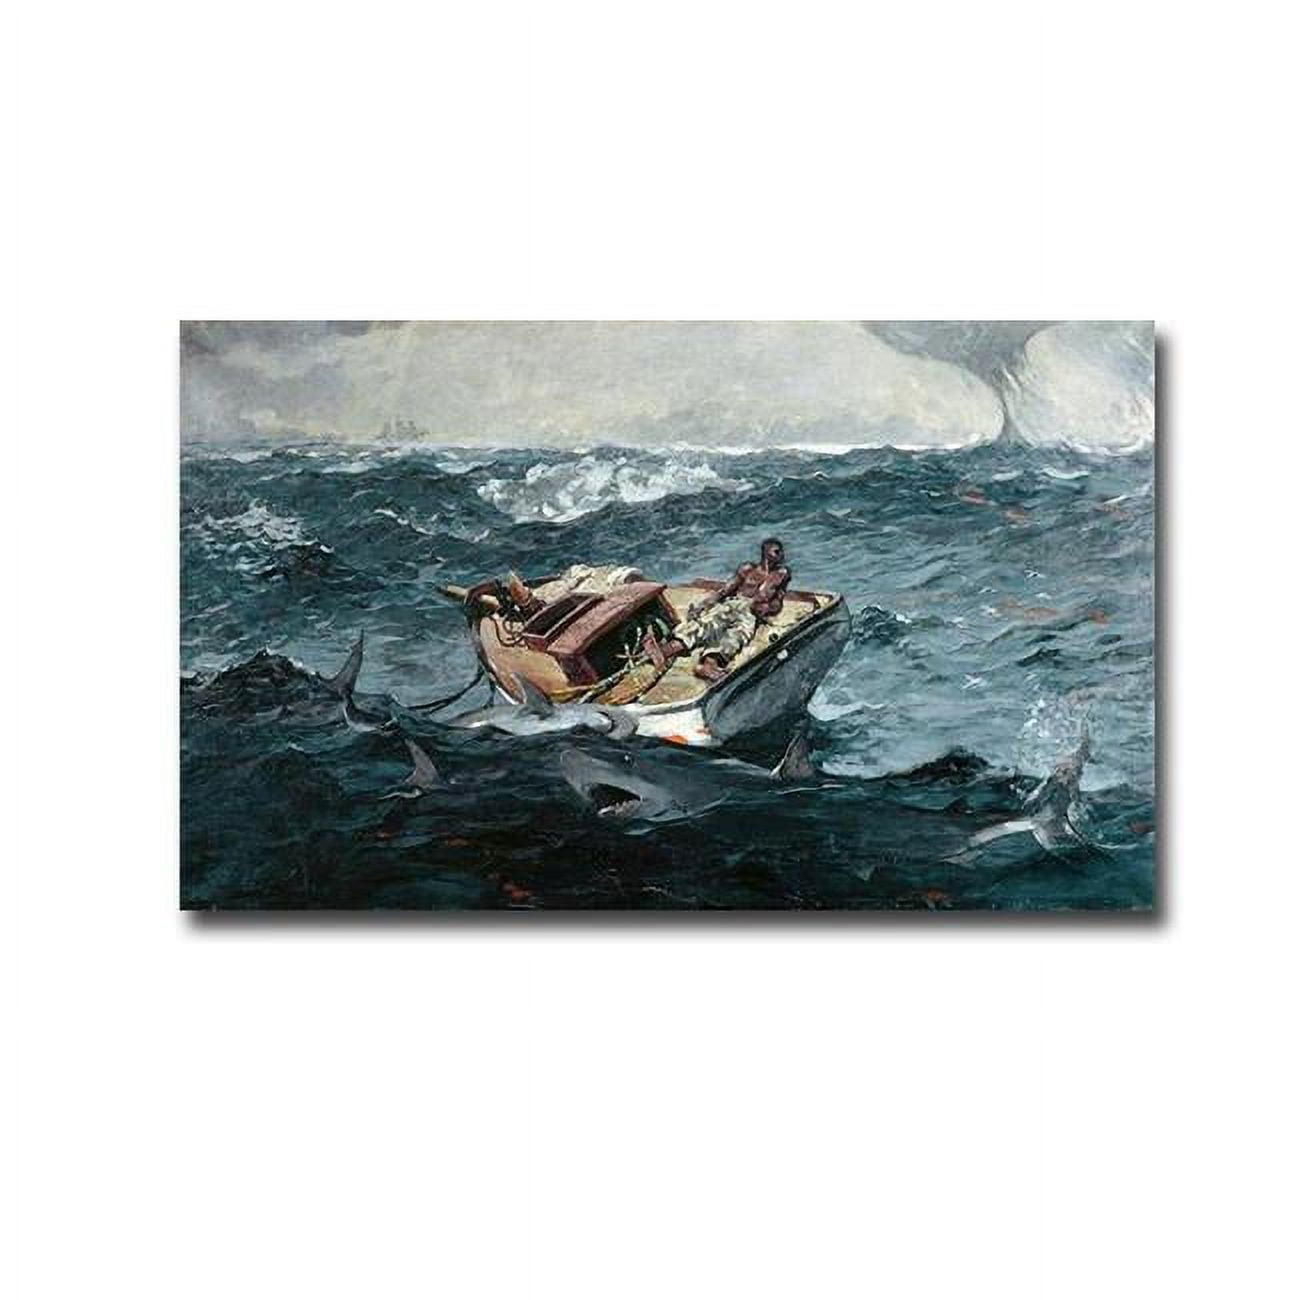 2440786bg Gulf Stream By Winslow Homer Premium Gallery-wrapped Canvas Giclee Art - Ready To Hang, 24 X 40 X 1.5 In.